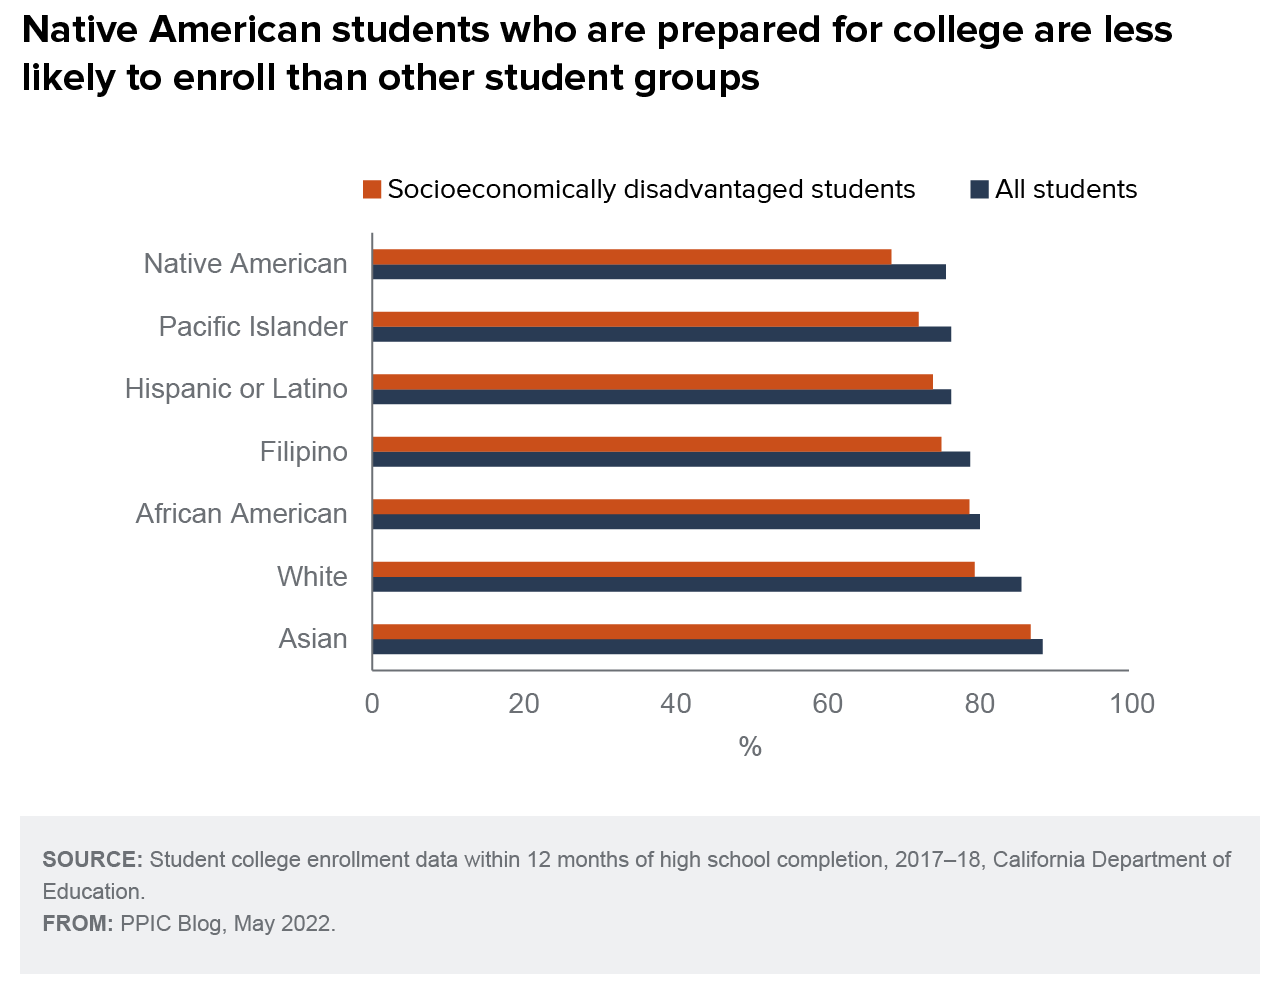 figure - Native American students who are prepared for college are less likely to enroll than other student groups